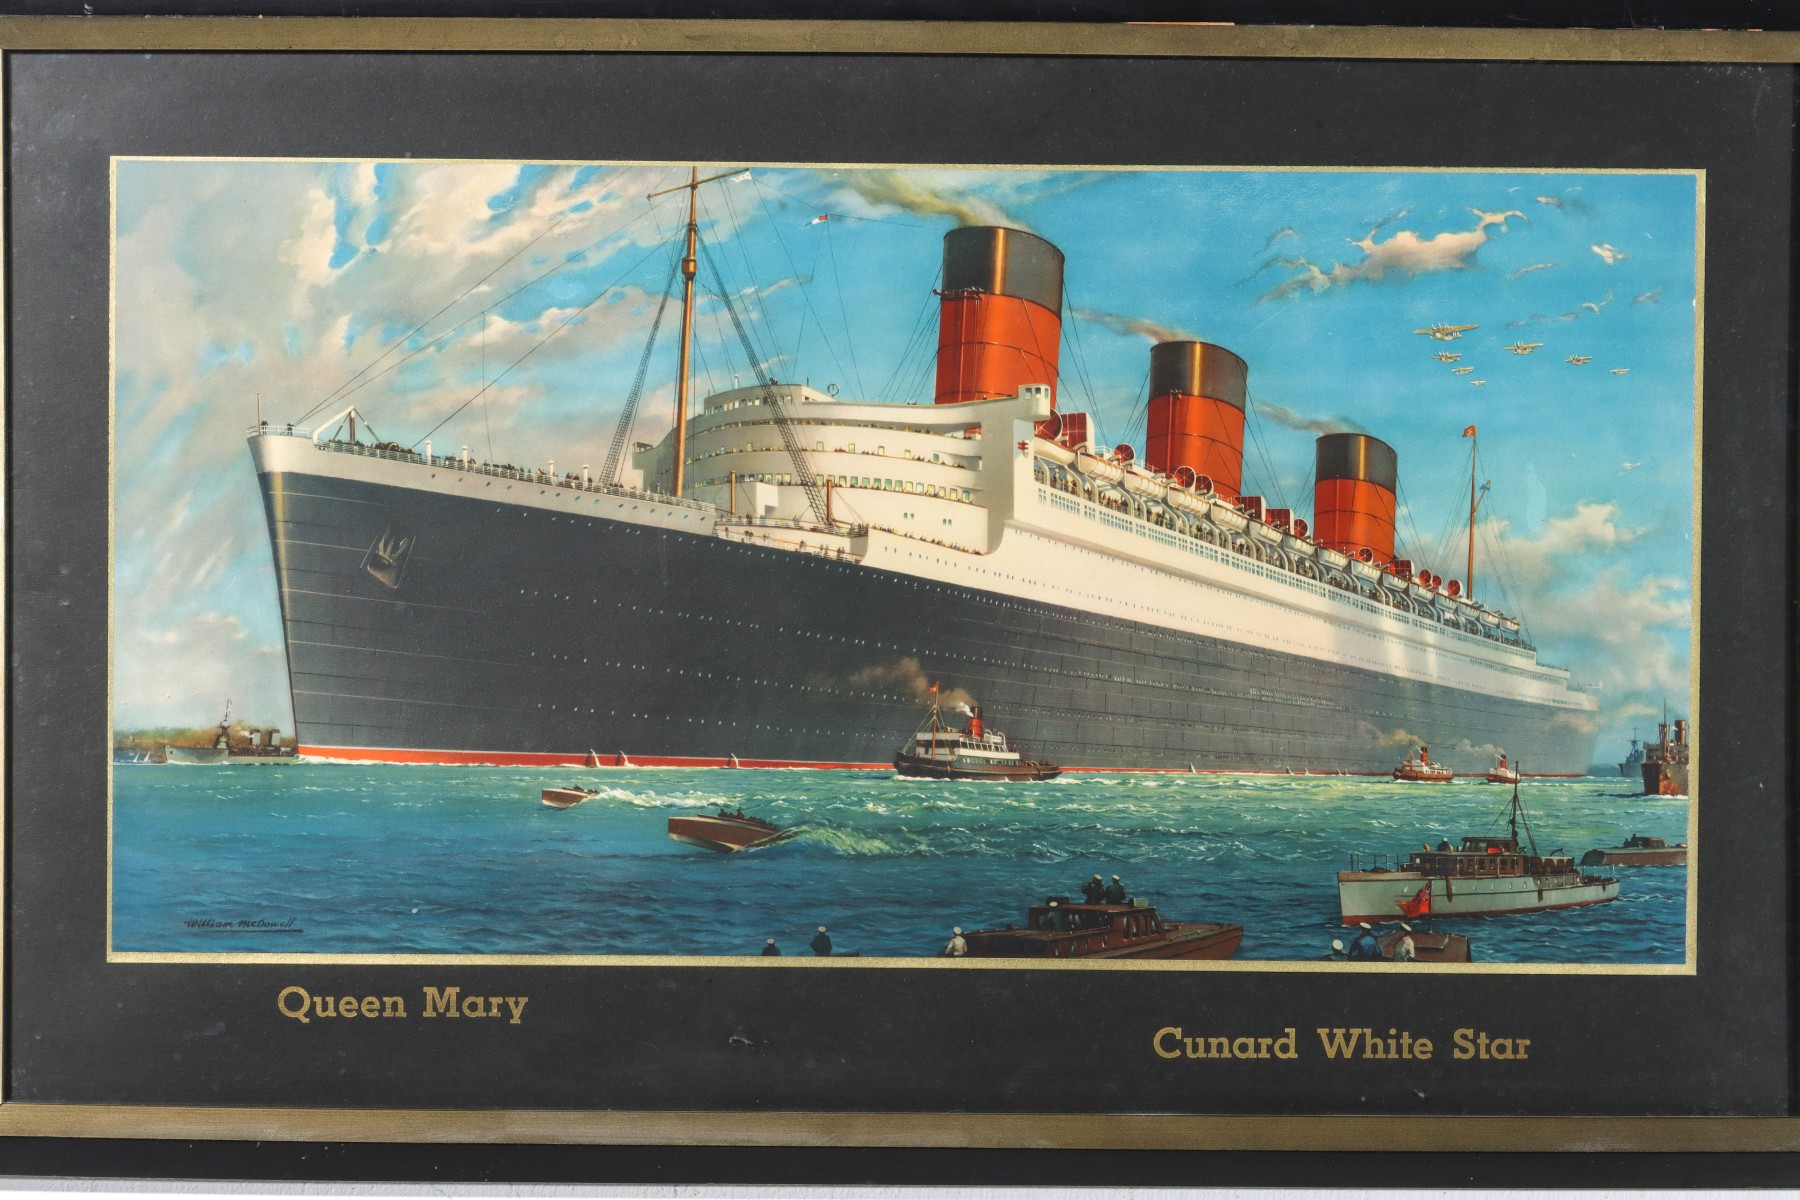 A CUNARD WHITE STAR'S QUEEN MARY PROMOTIONAL POSTER